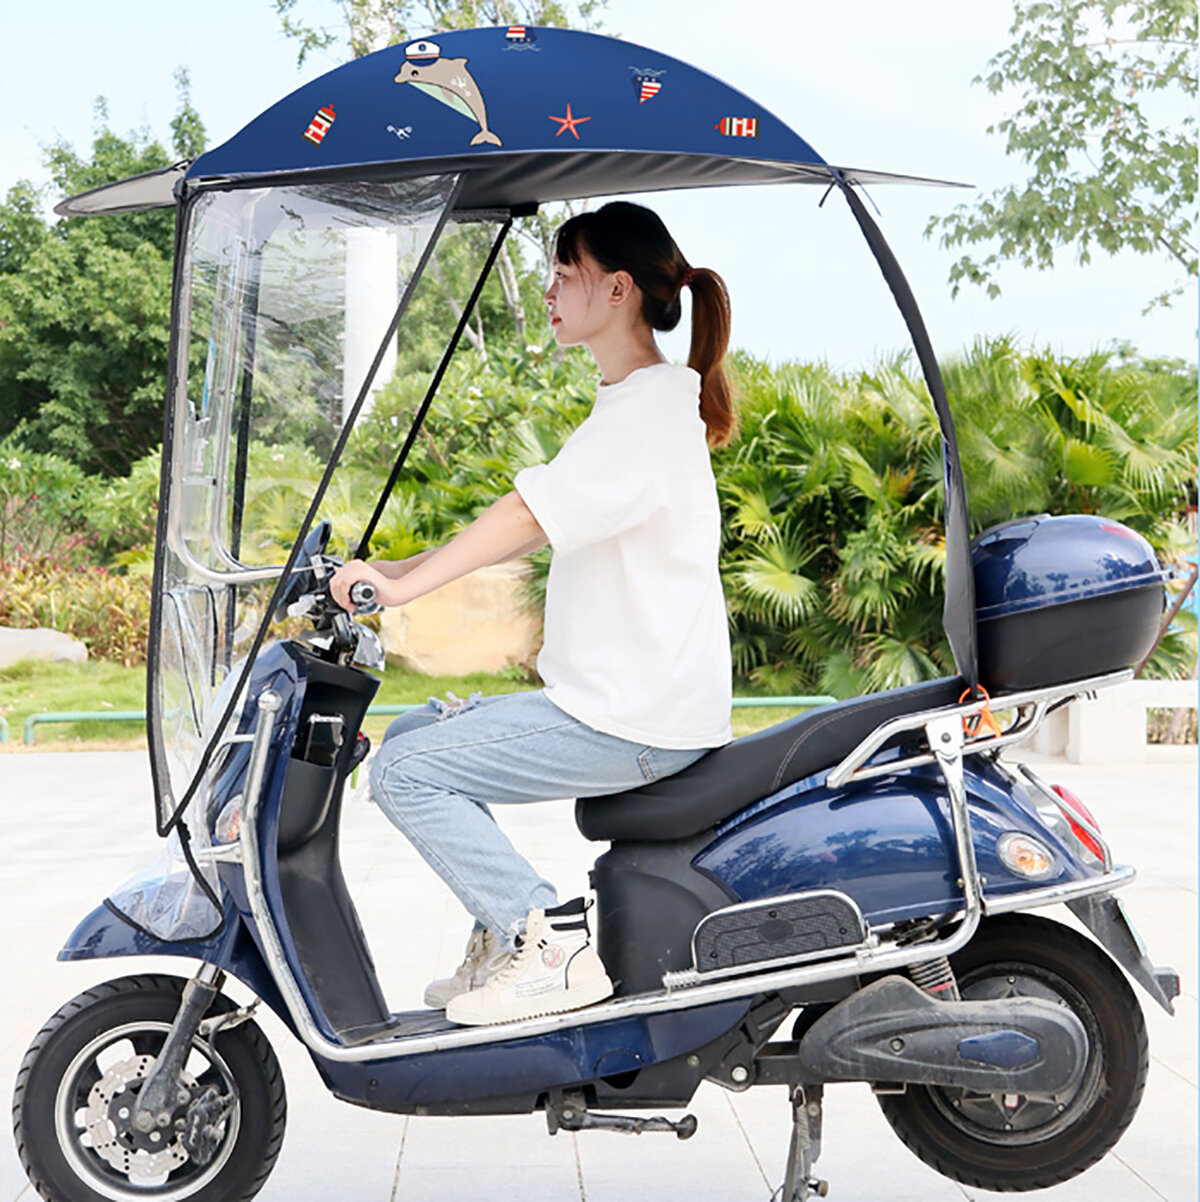 Motorbike Scooter Sun Shade Rain Cover Electric Vehicle Umbrella Mobility Raincoat Poncho Dust Proof